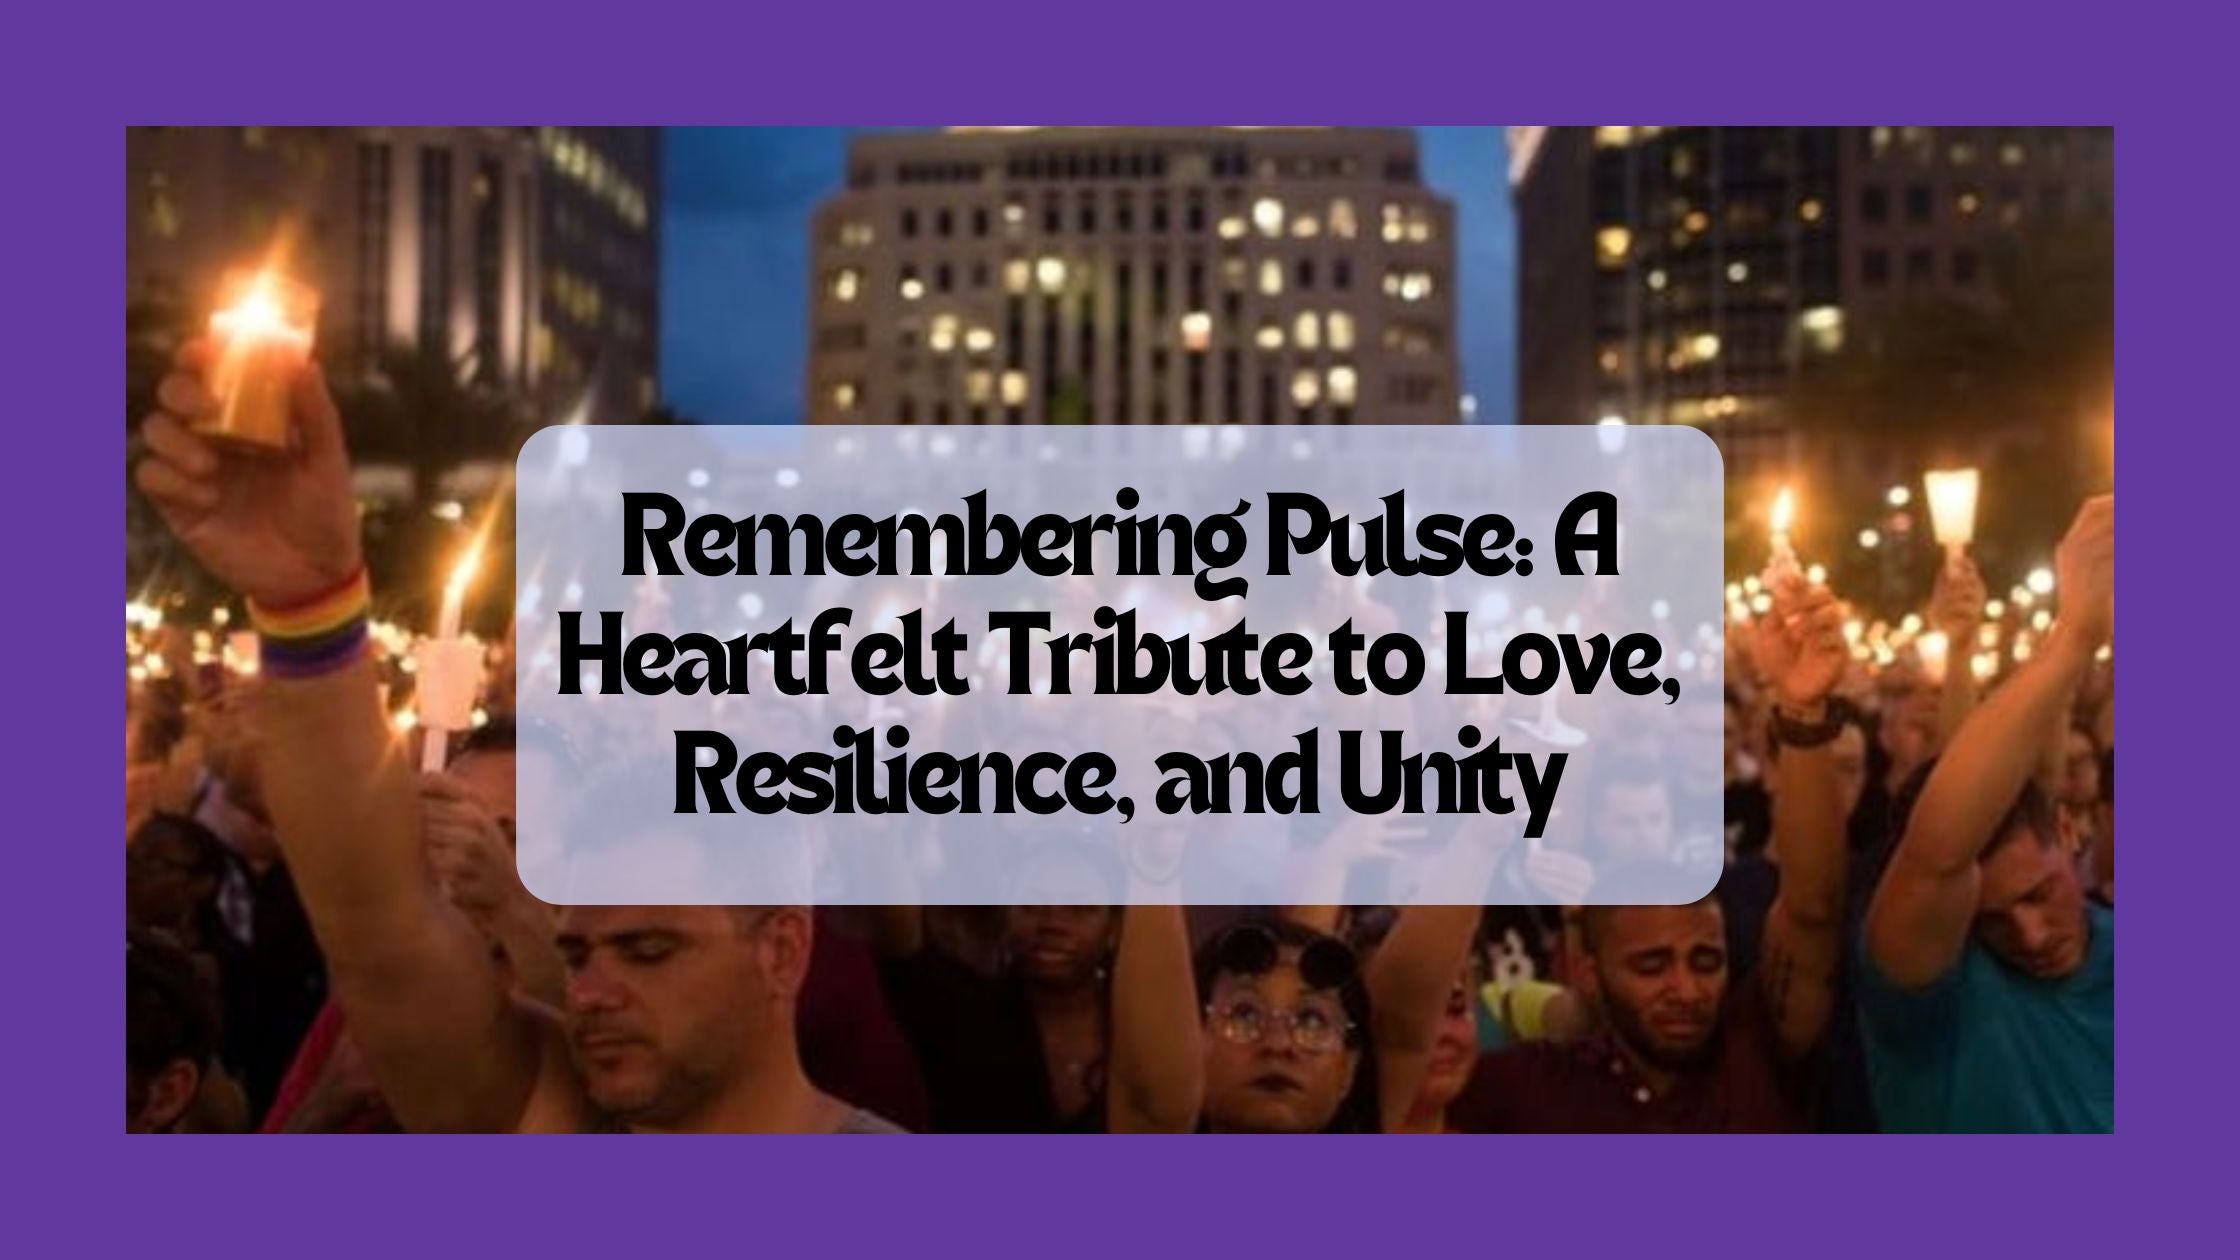 Remembering Pulse: A Heartfelt Tribute to Love, Resilience, and Unity